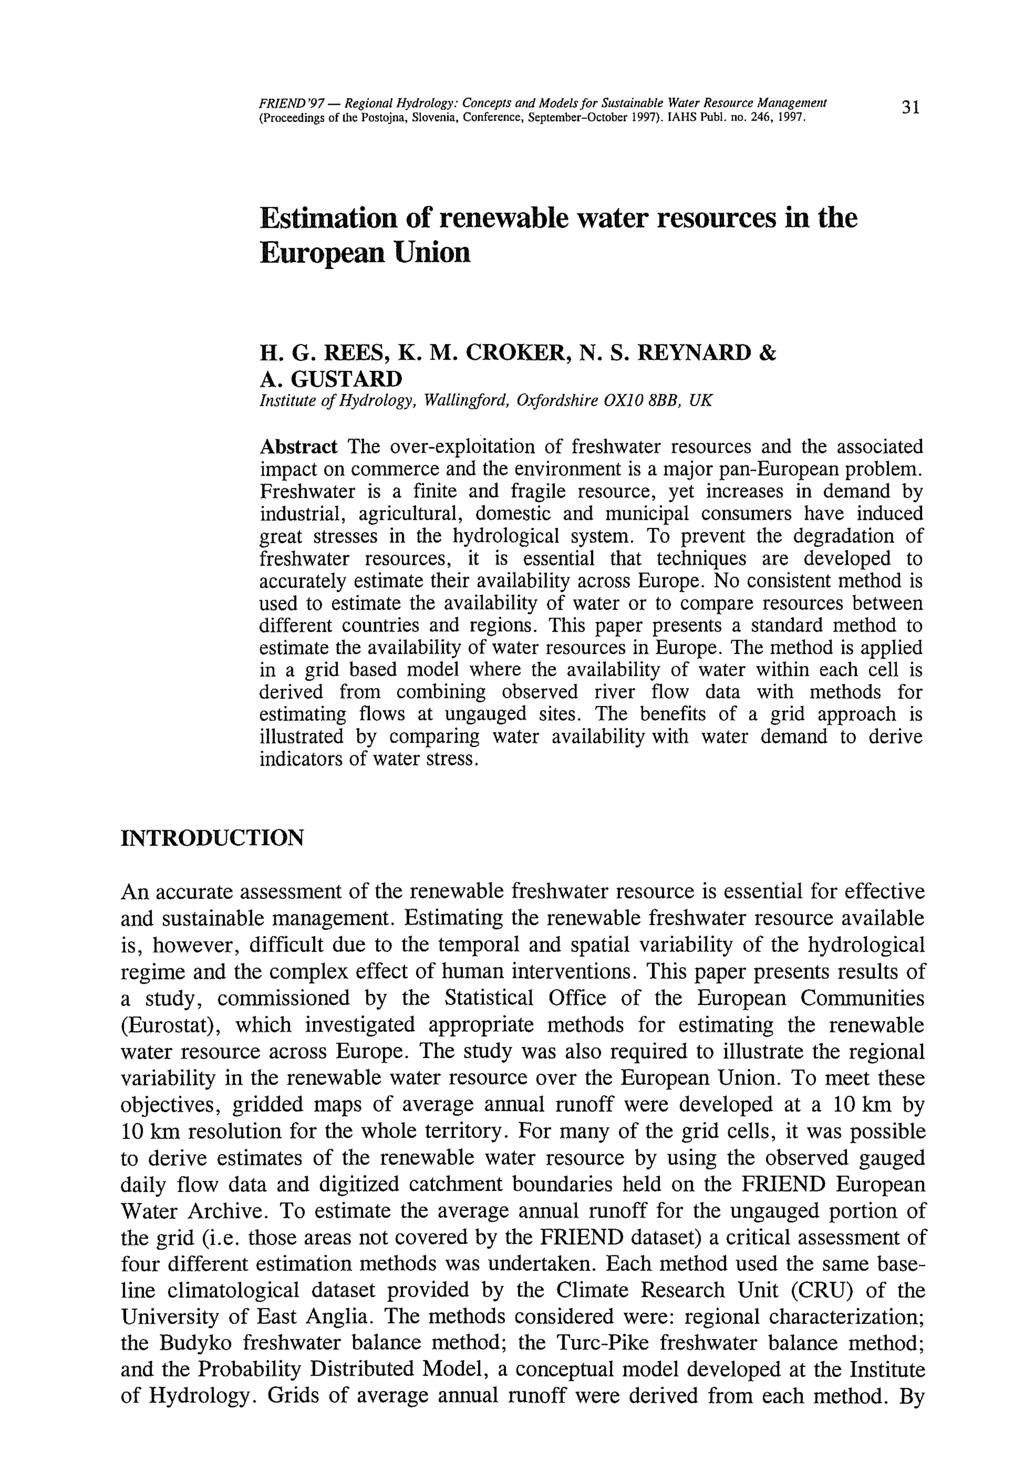 FRIEND '97 Regional Hydrology: Concepts and Models for Sustainable Water Resource Management (Proceedings of the Postojna, Slovenia, Conference, September-October 1997). IAHS Publ. no. 246, 1997.